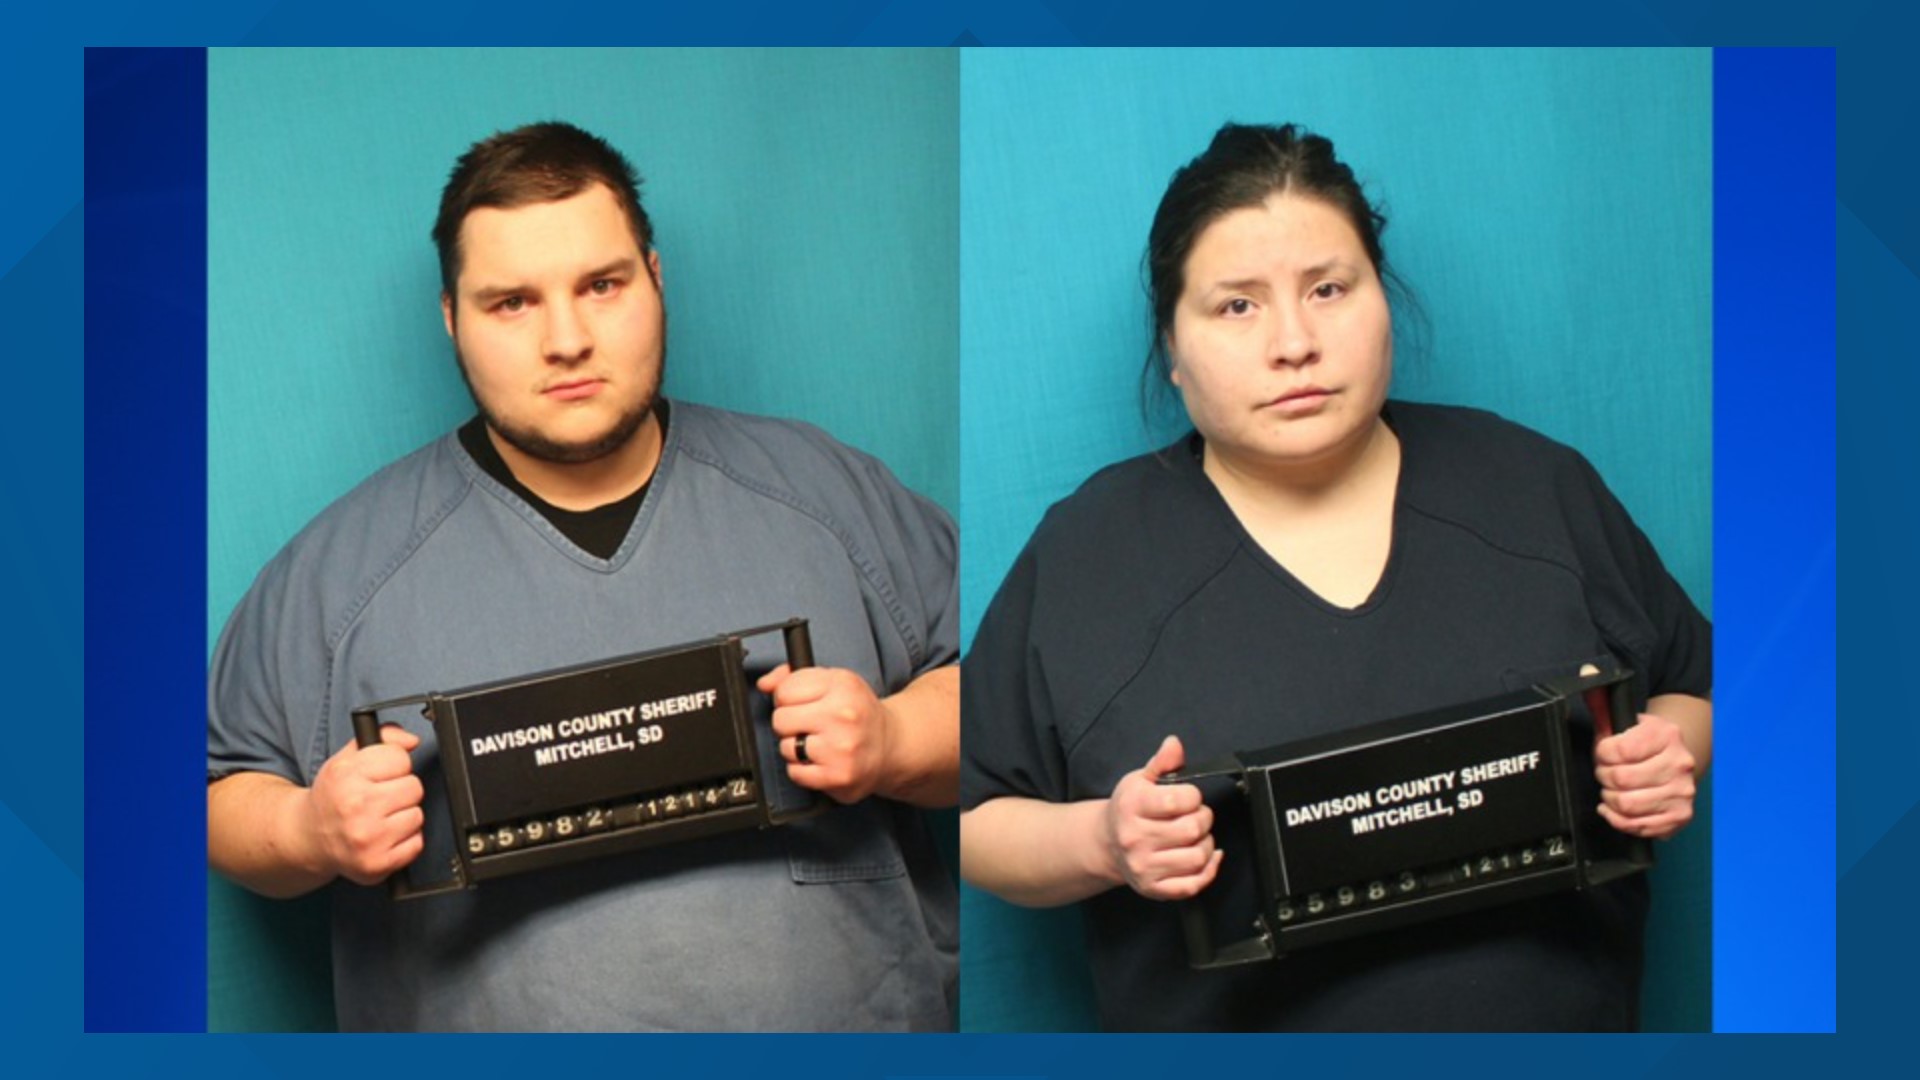 New details emerge involving the Airway Heights couple arrested in South Dakota and other top stories at 4 p.m.